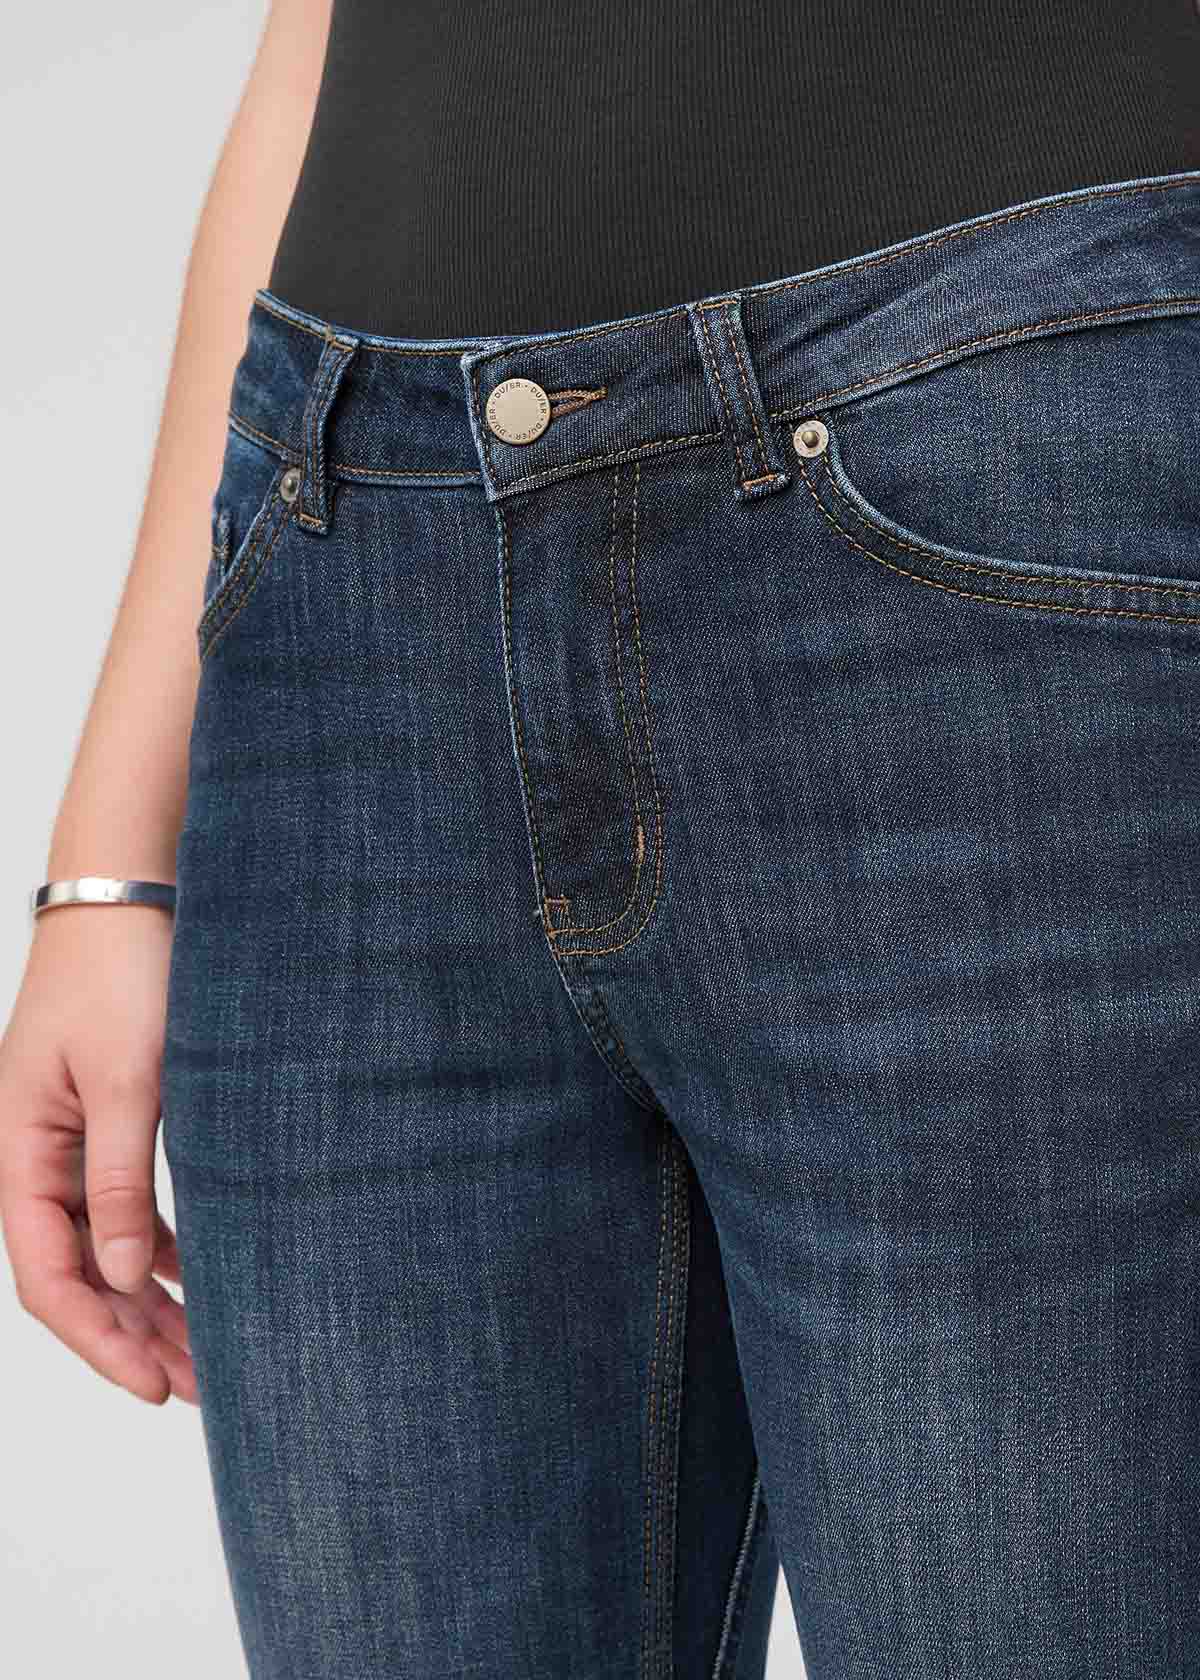 womens blue mid rise relaxed stretch jeans front waistband detail